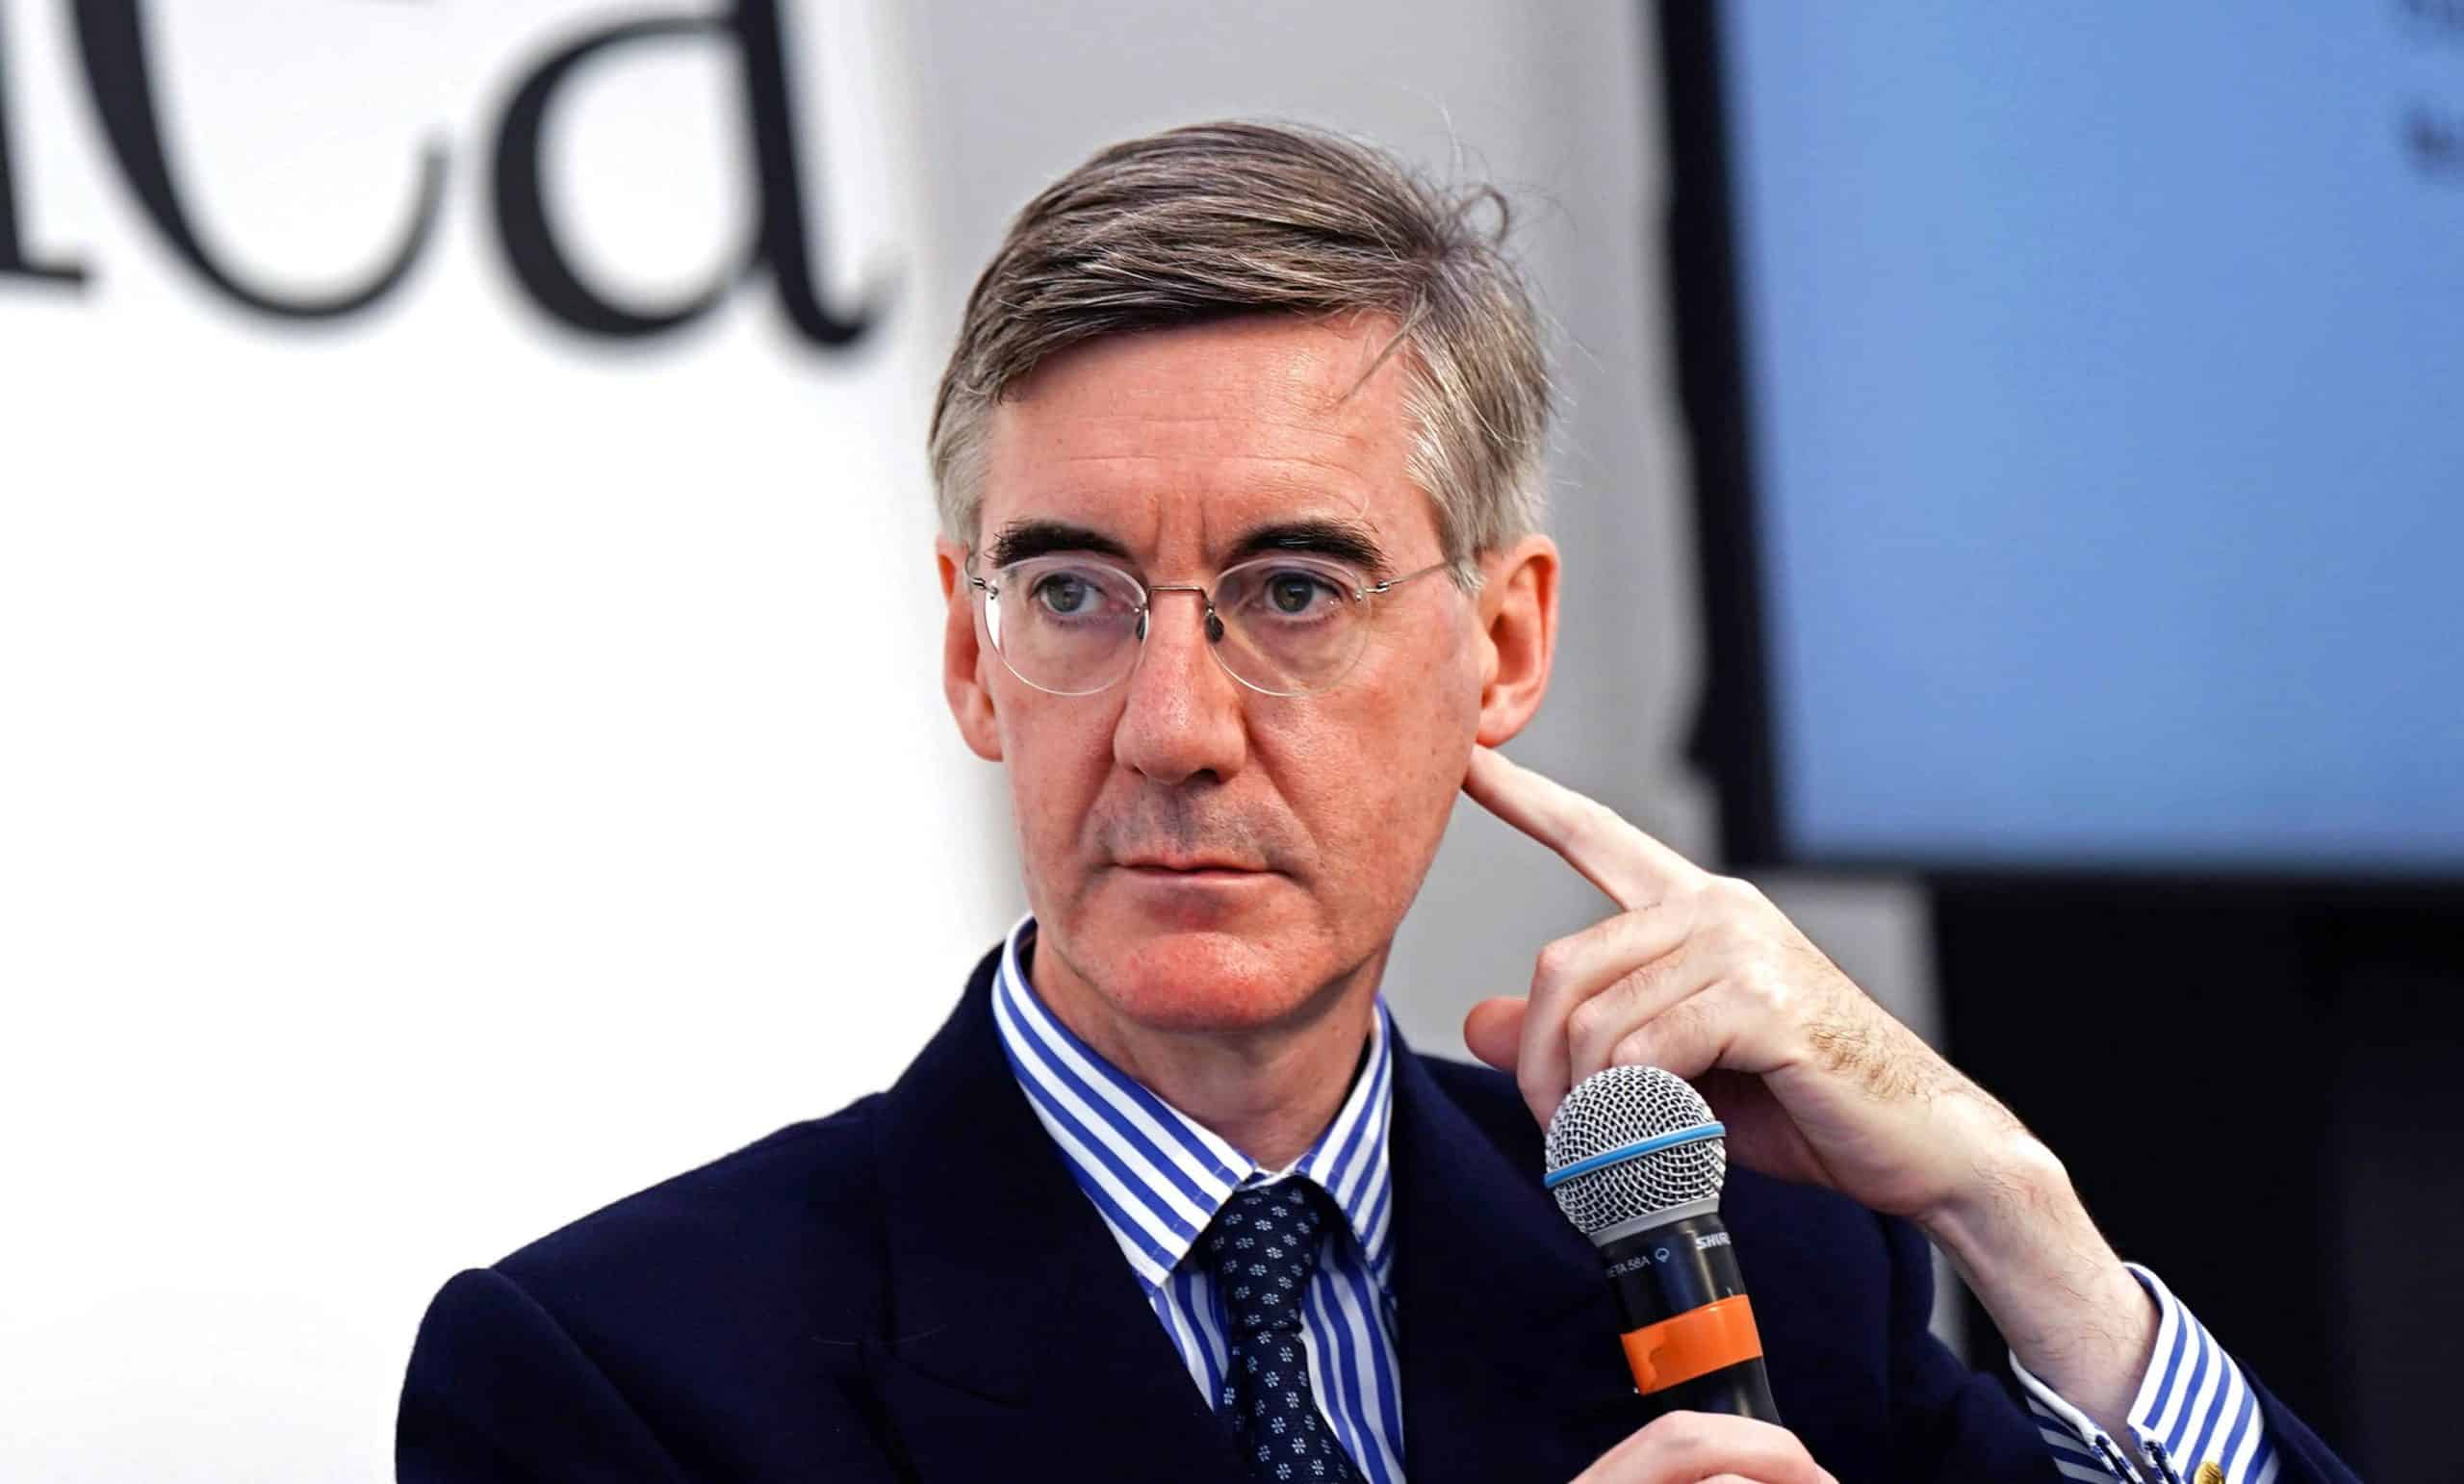 Jacob Rees-Mogg has a cunning plan for reducing migration